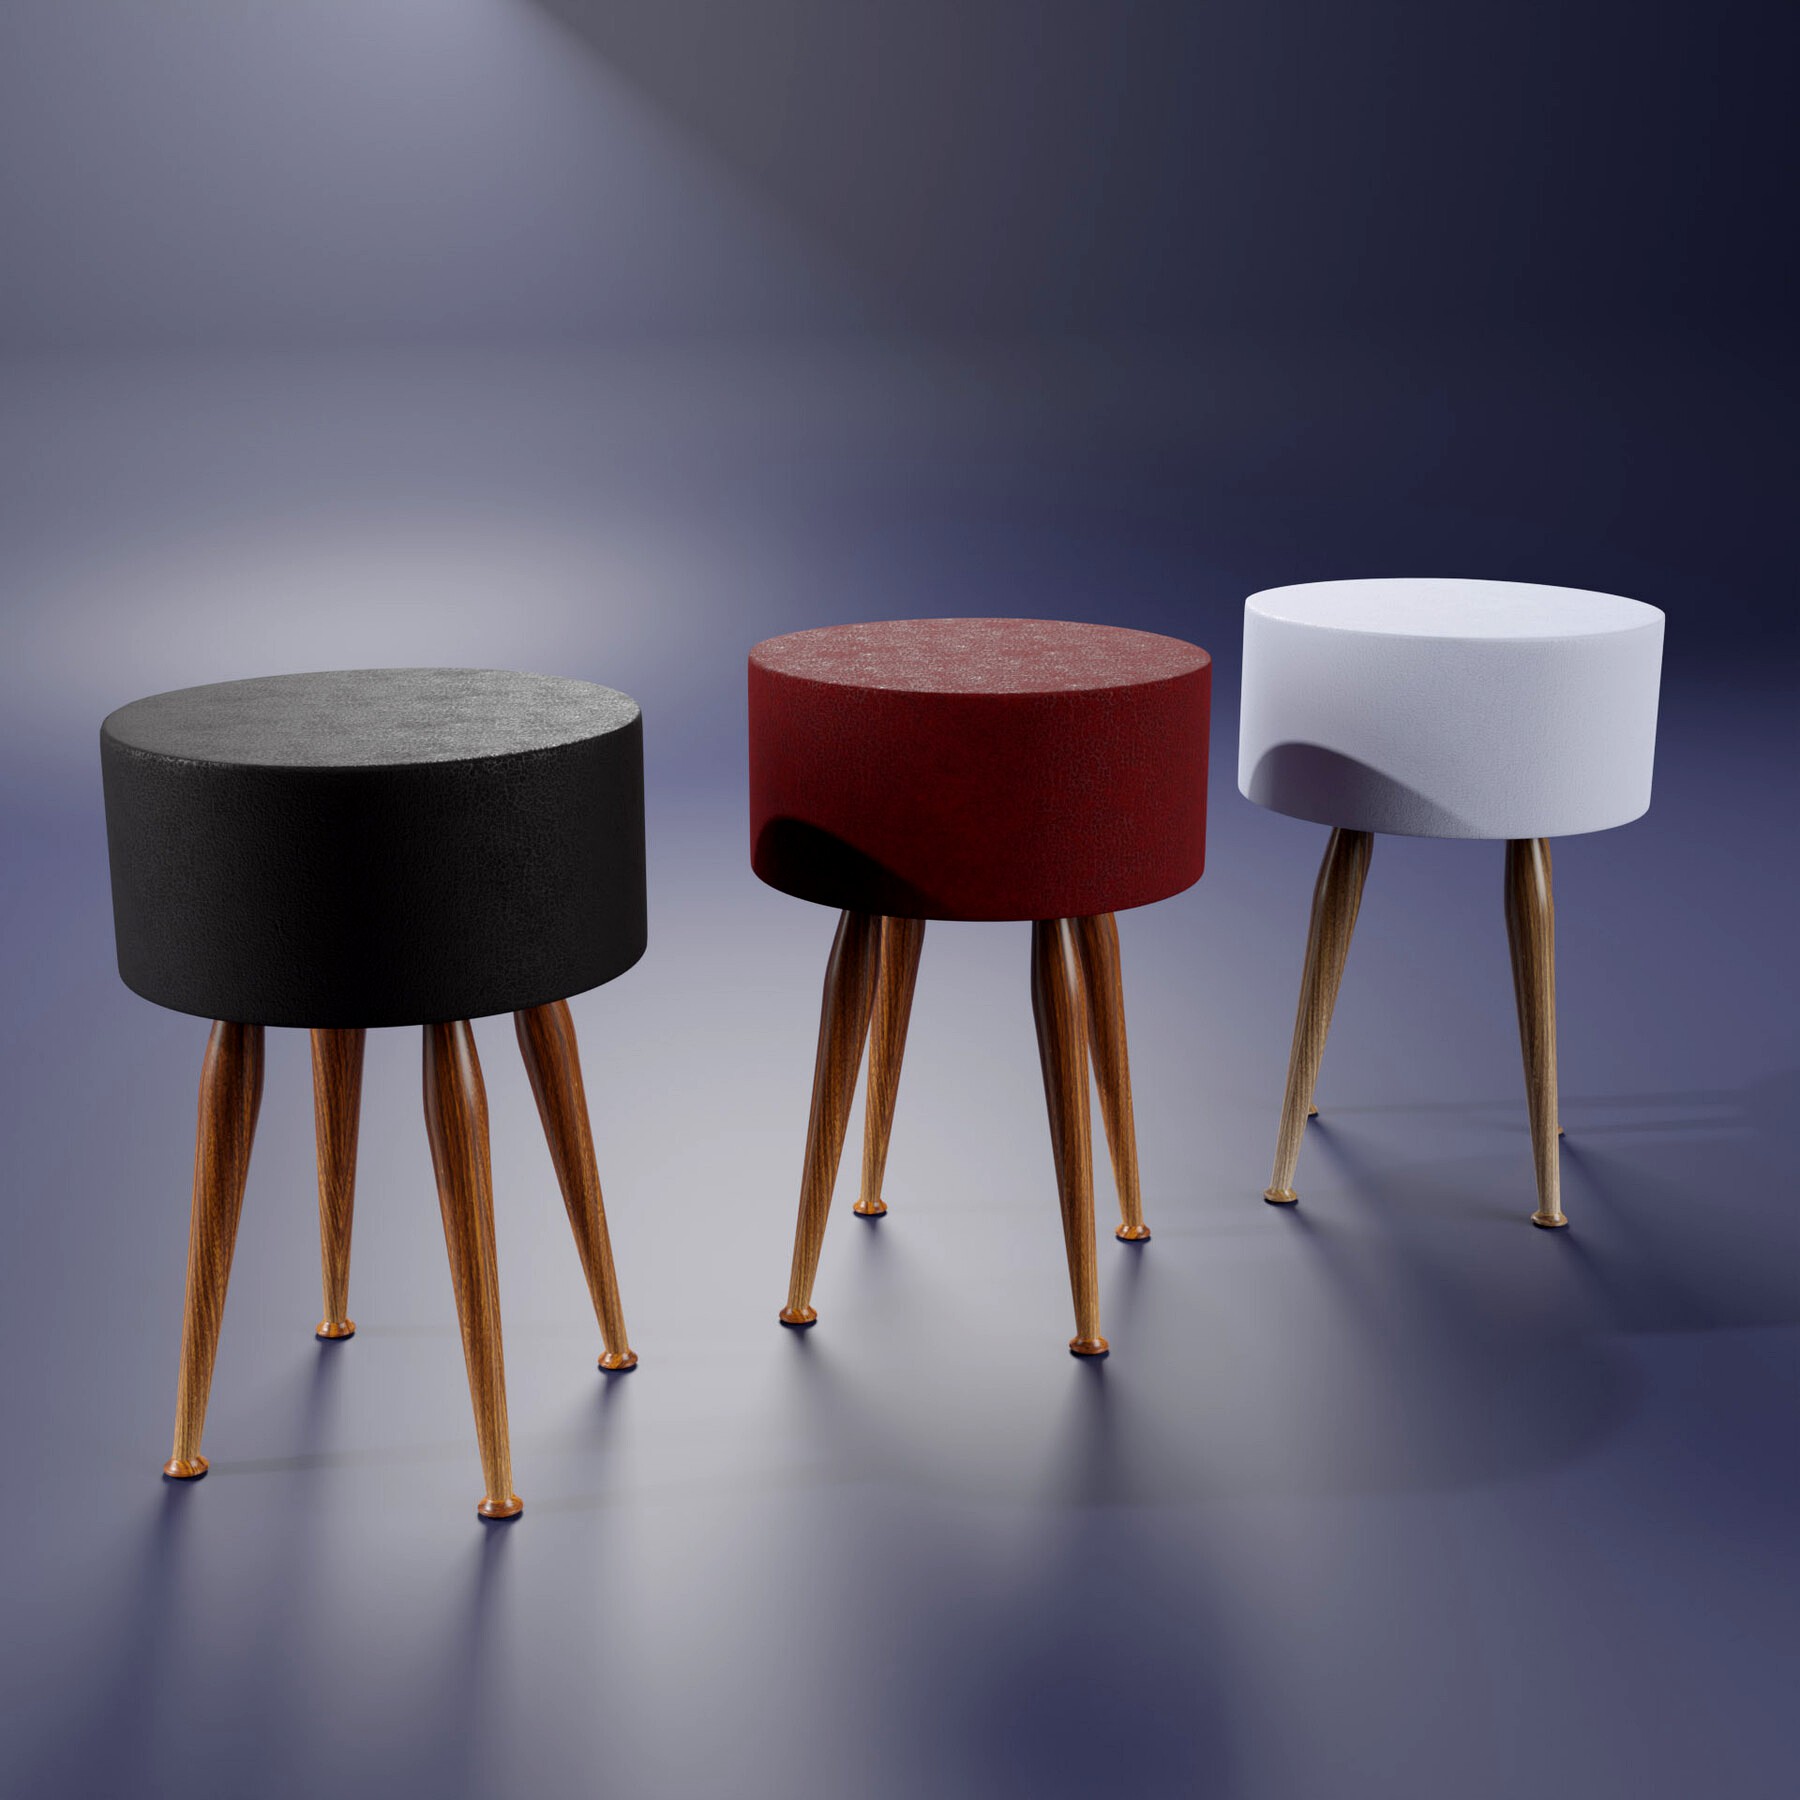 Stool - Realistic wood-leather Stool-Chair - 3D model